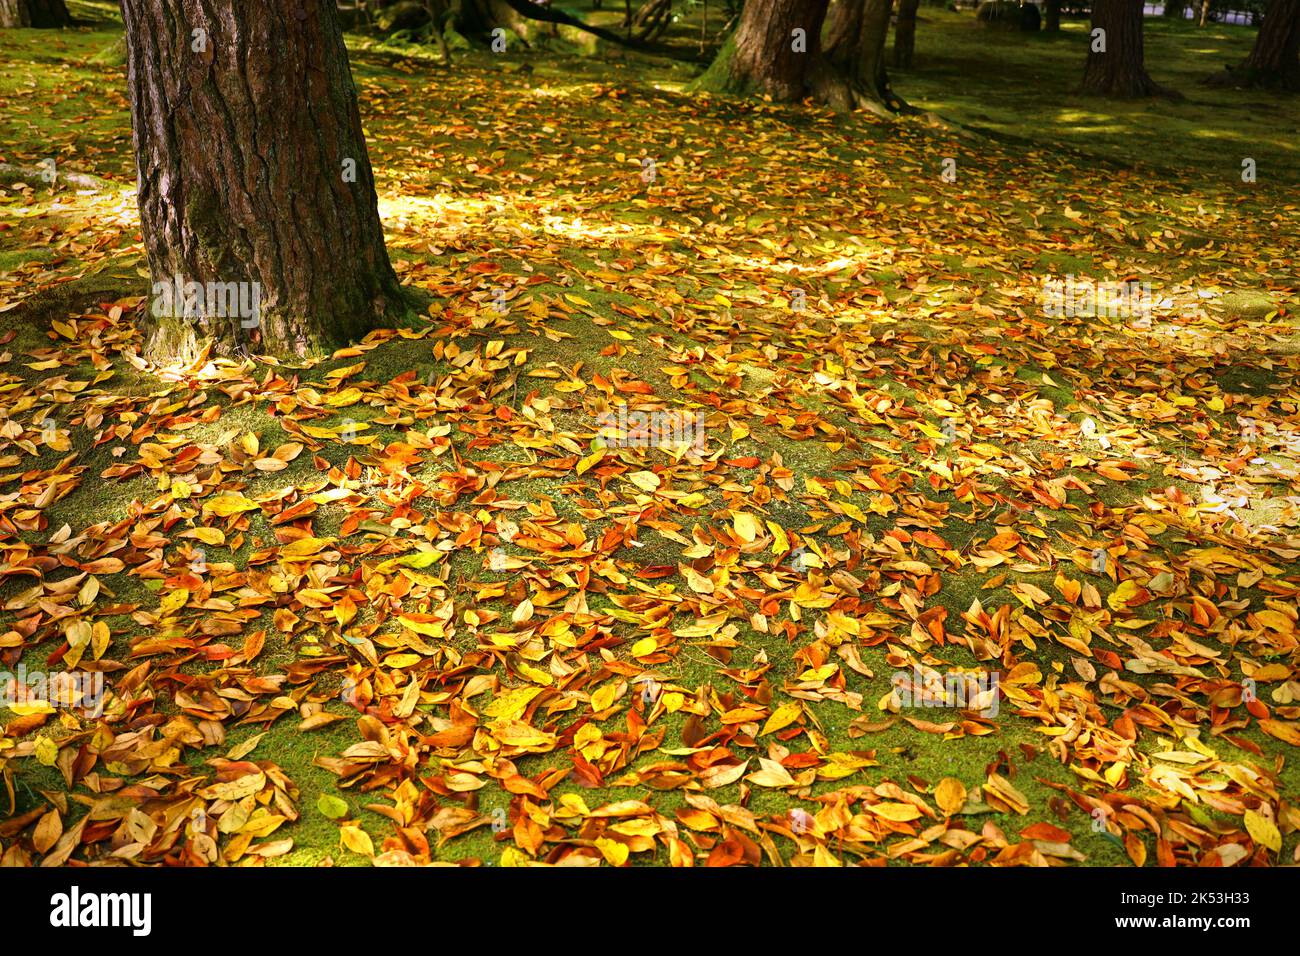 Colorful autumn scenery with yellow and red fallen leaves Stock Photo